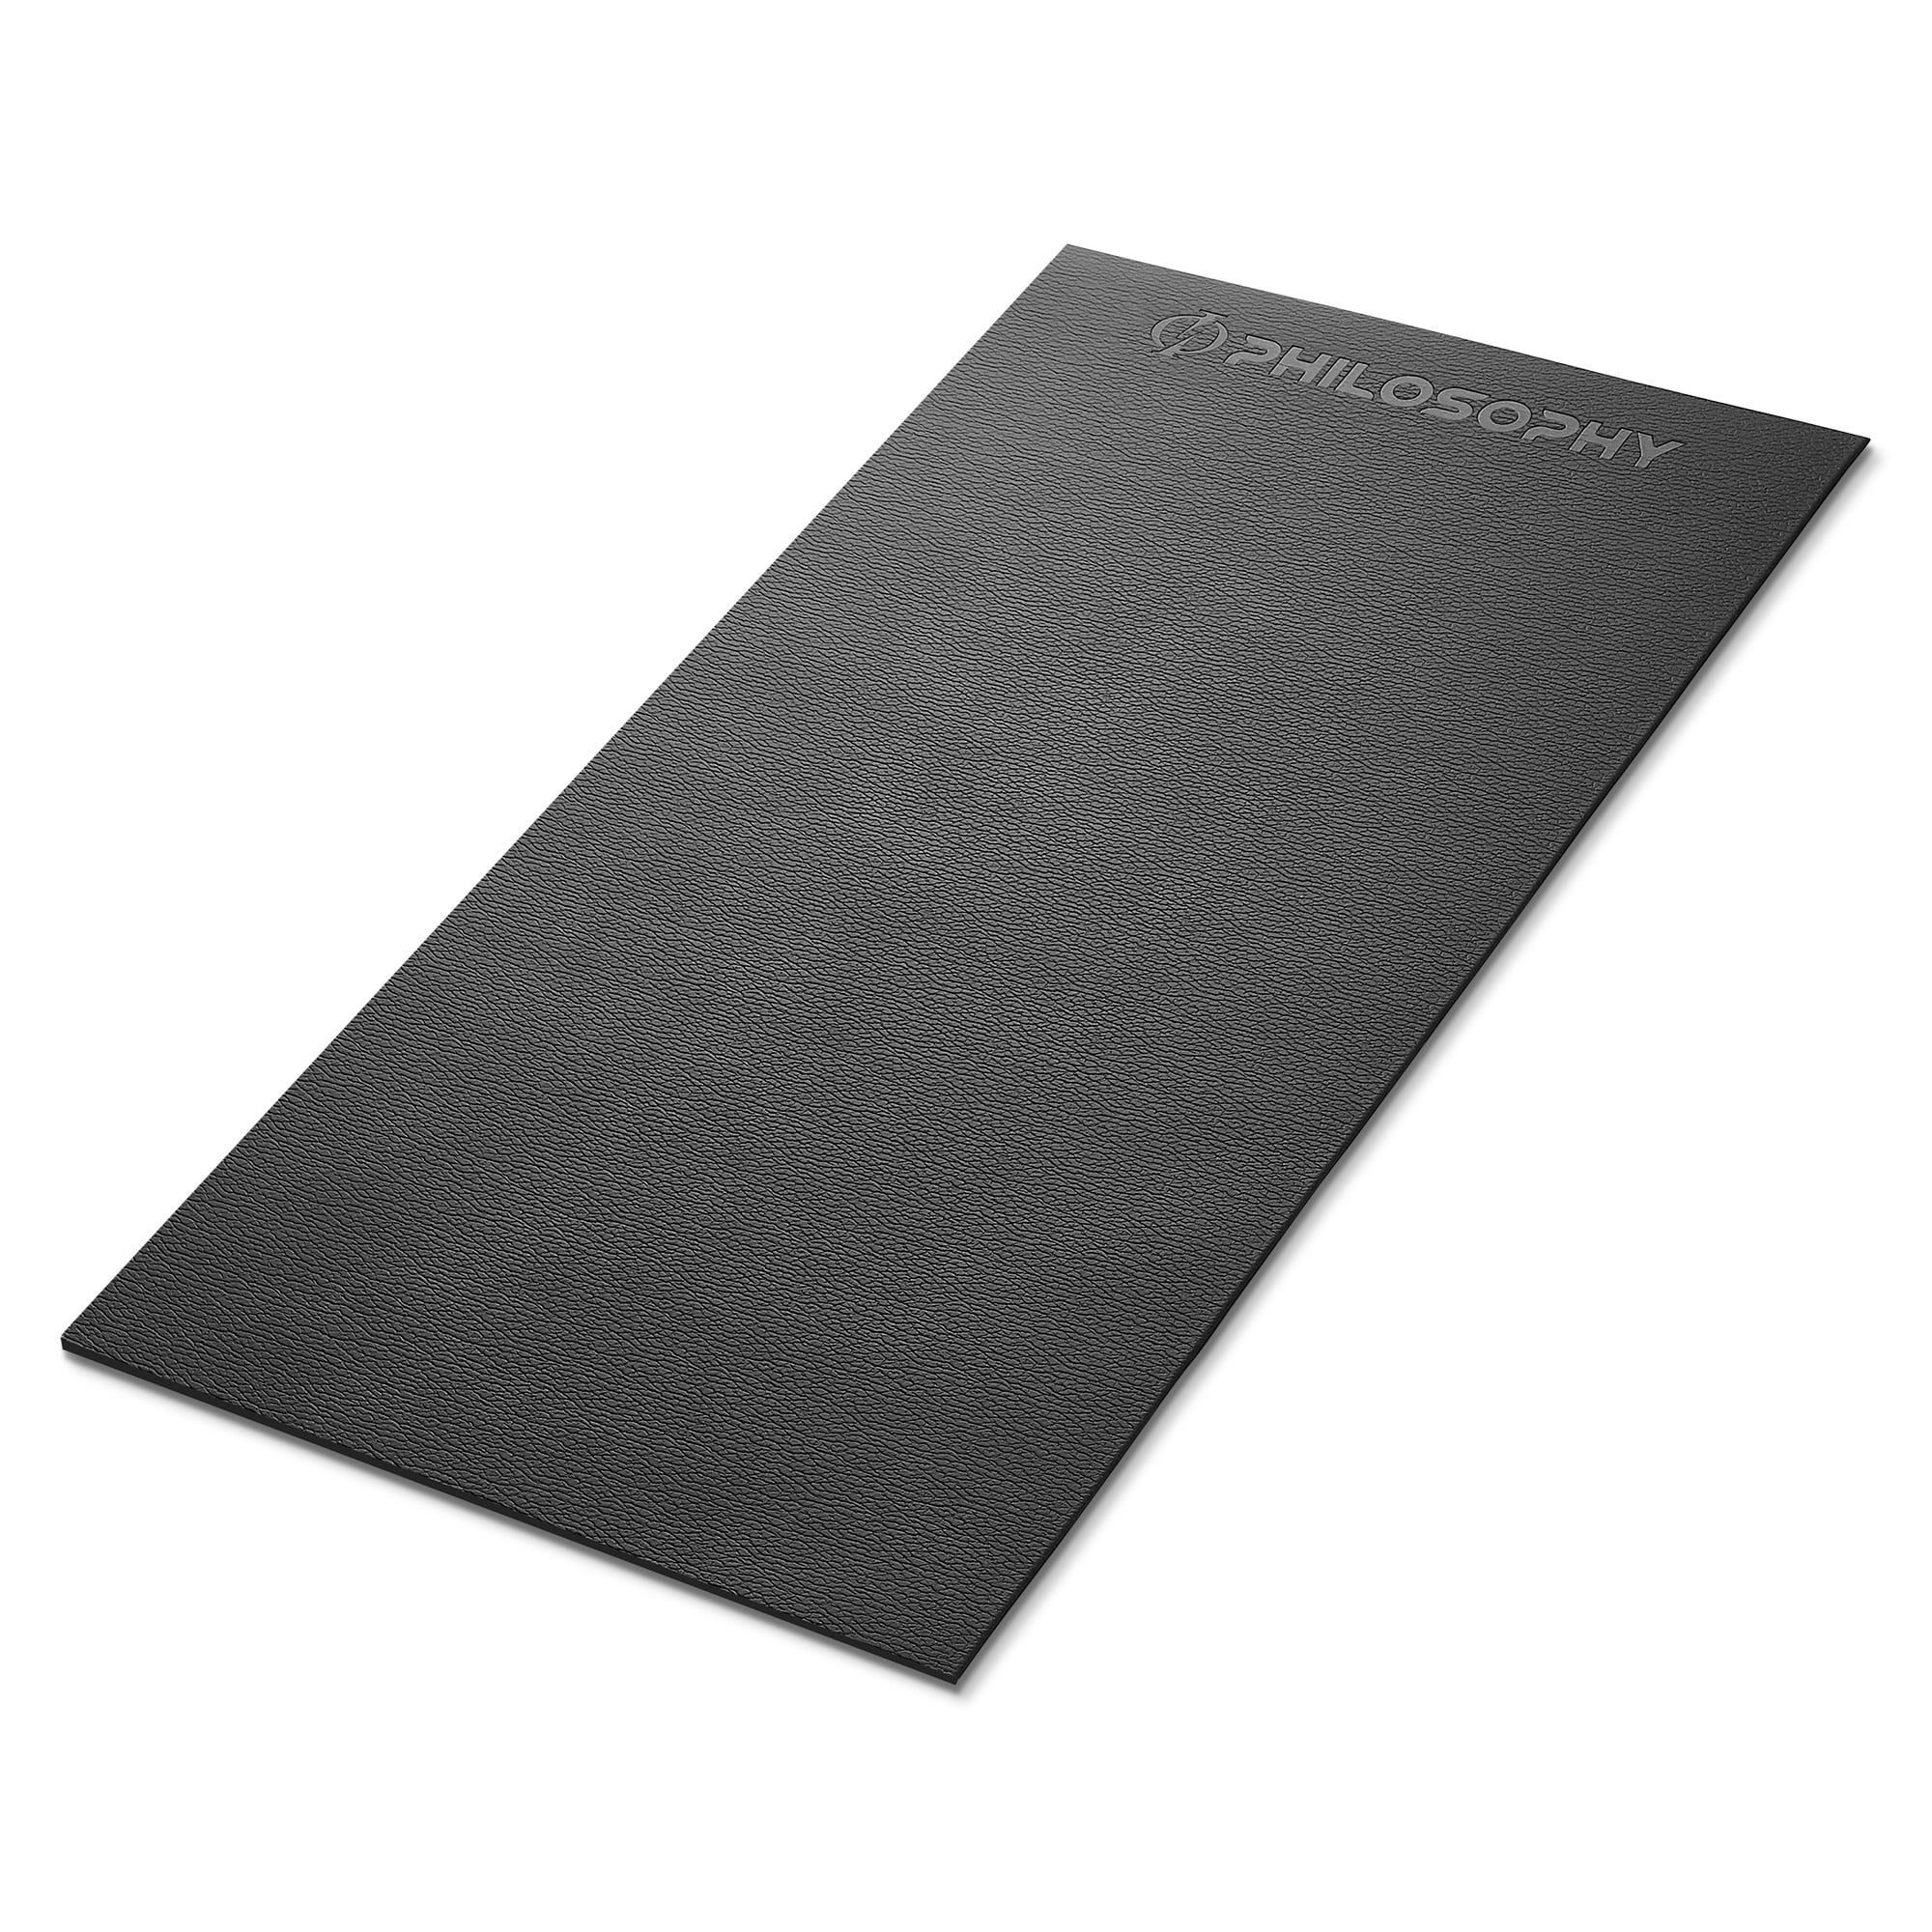 Treadmills Philosophy Gym Exercise Equipment Mat 6mm Thick High Density PVC Floor Mat for Ellipticals Stationary Bikes Rowers 